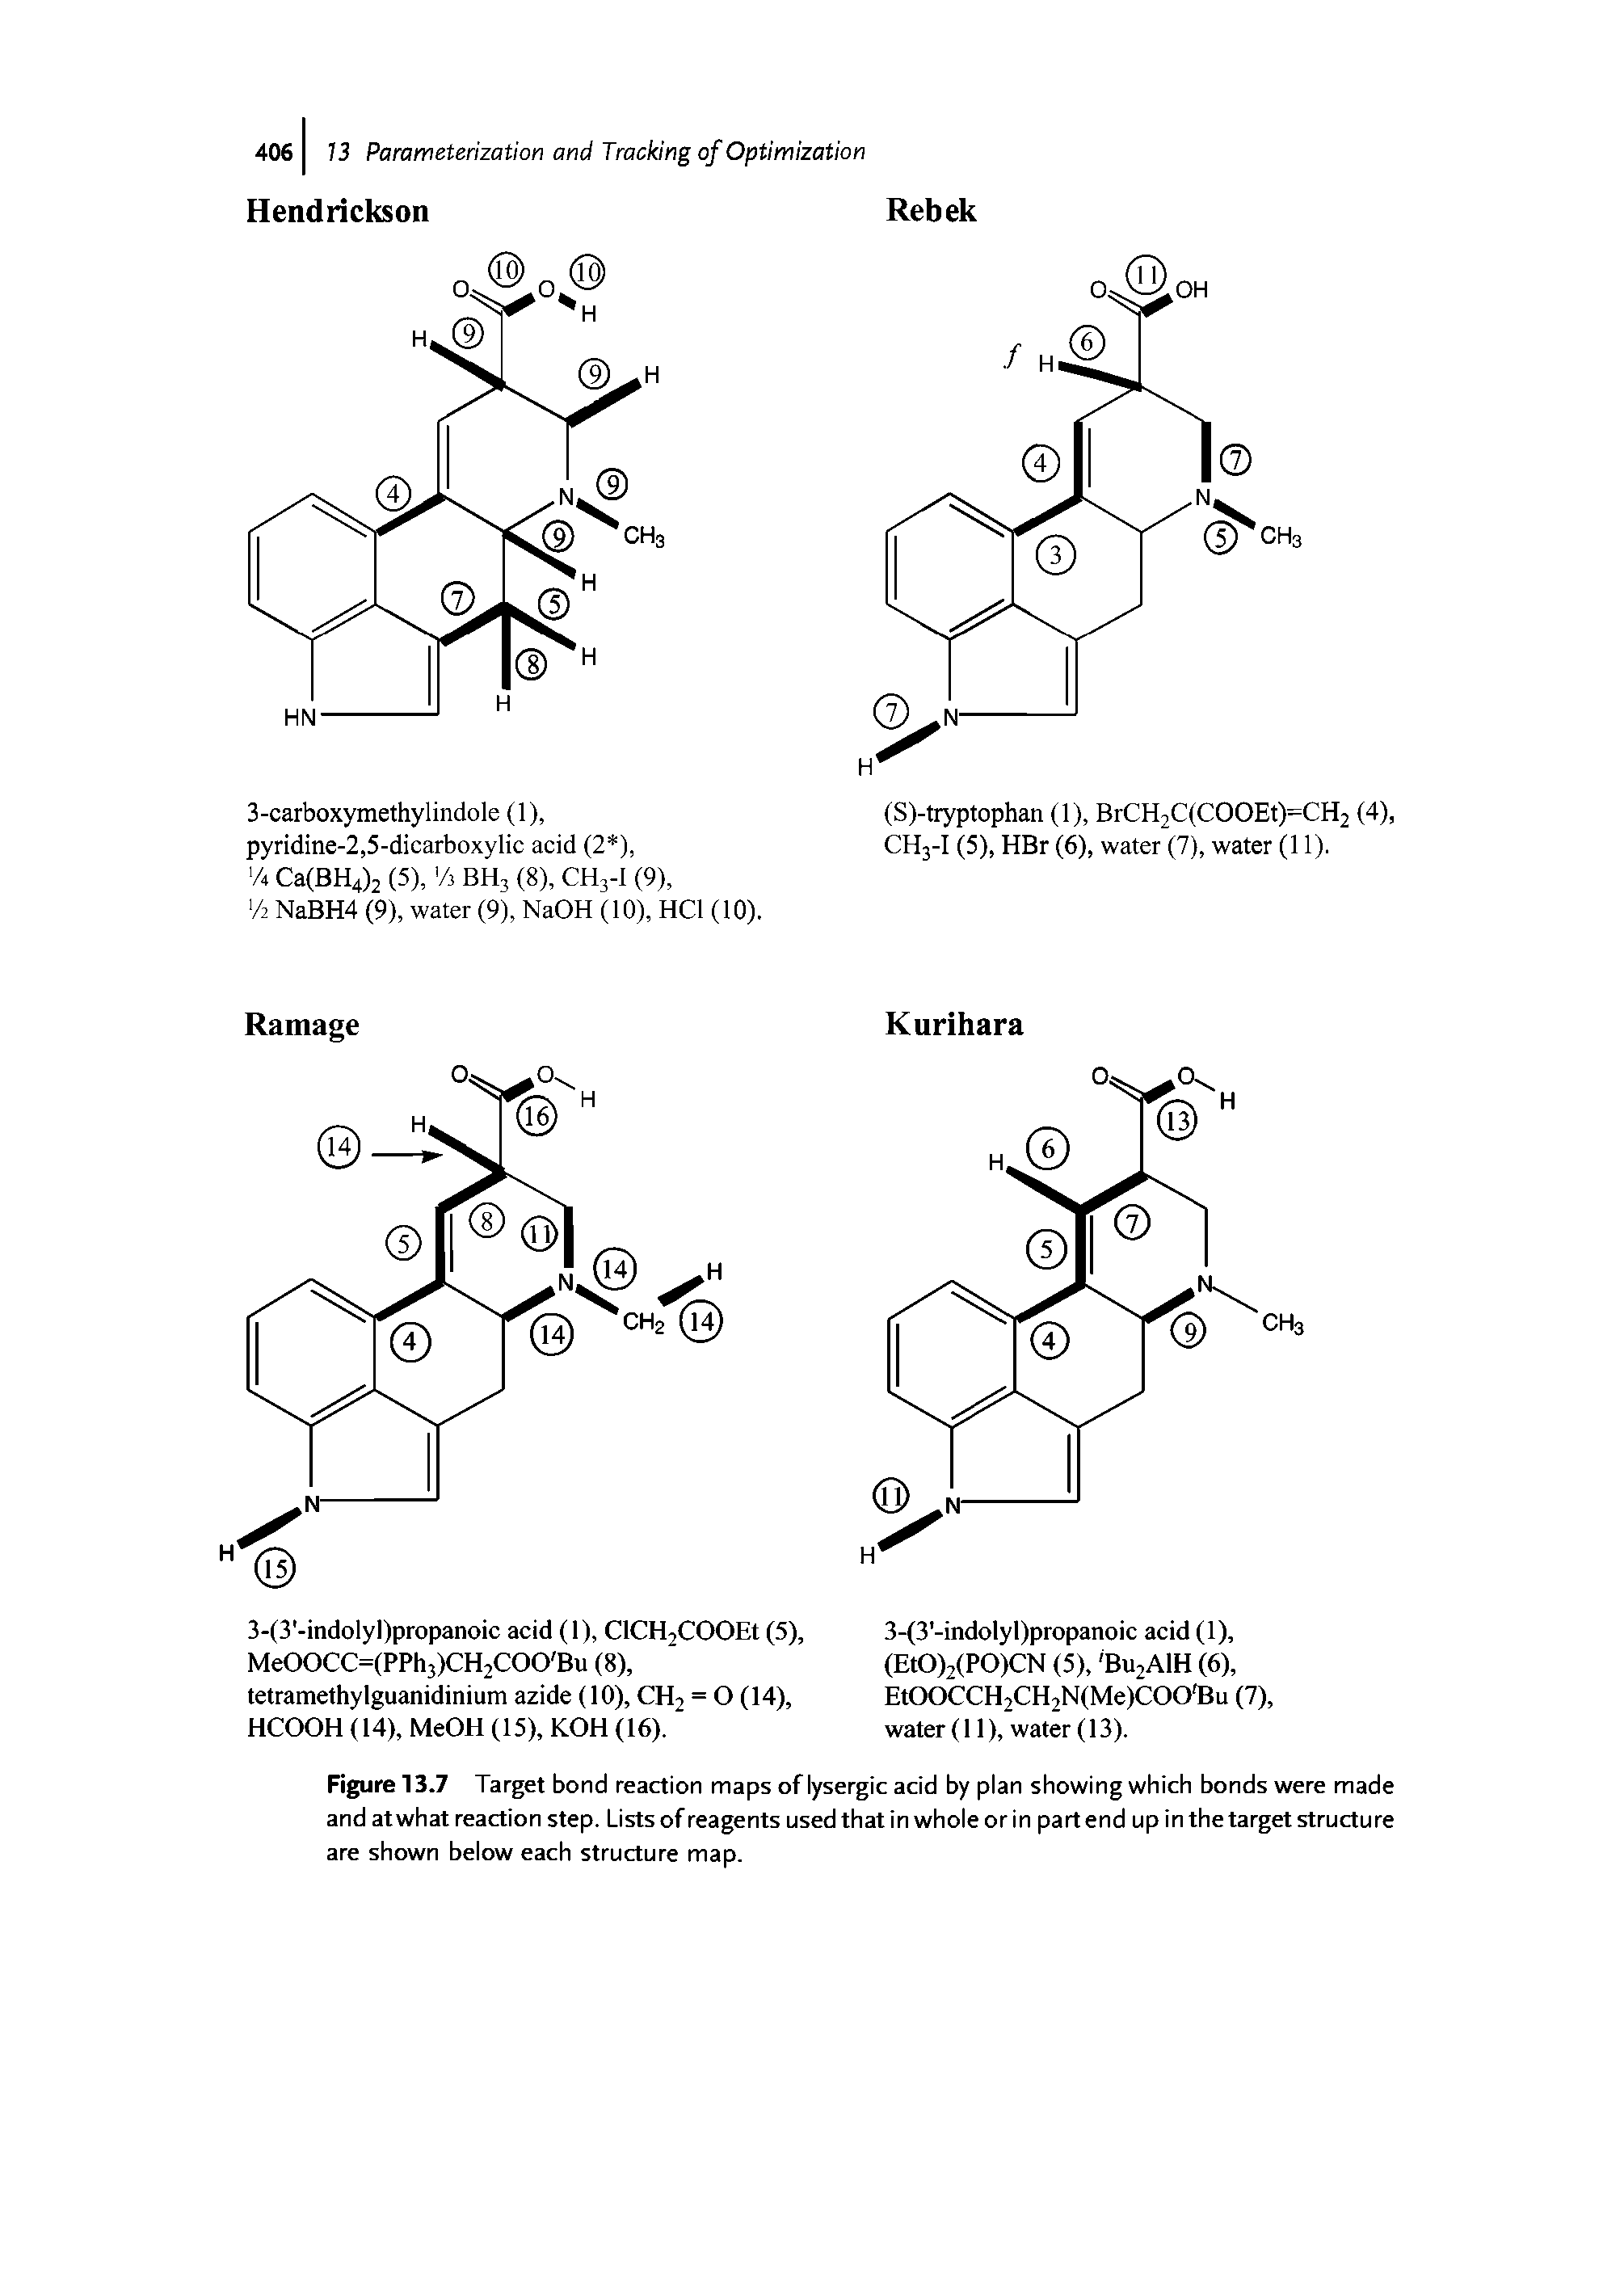 Figure 13.7 Target bond reaction maps of lysergic acid by plan showing which bonds were made and at what reaction step. Lists of reagents used that in whole or in part end up in the target structure are shown below each structure map.